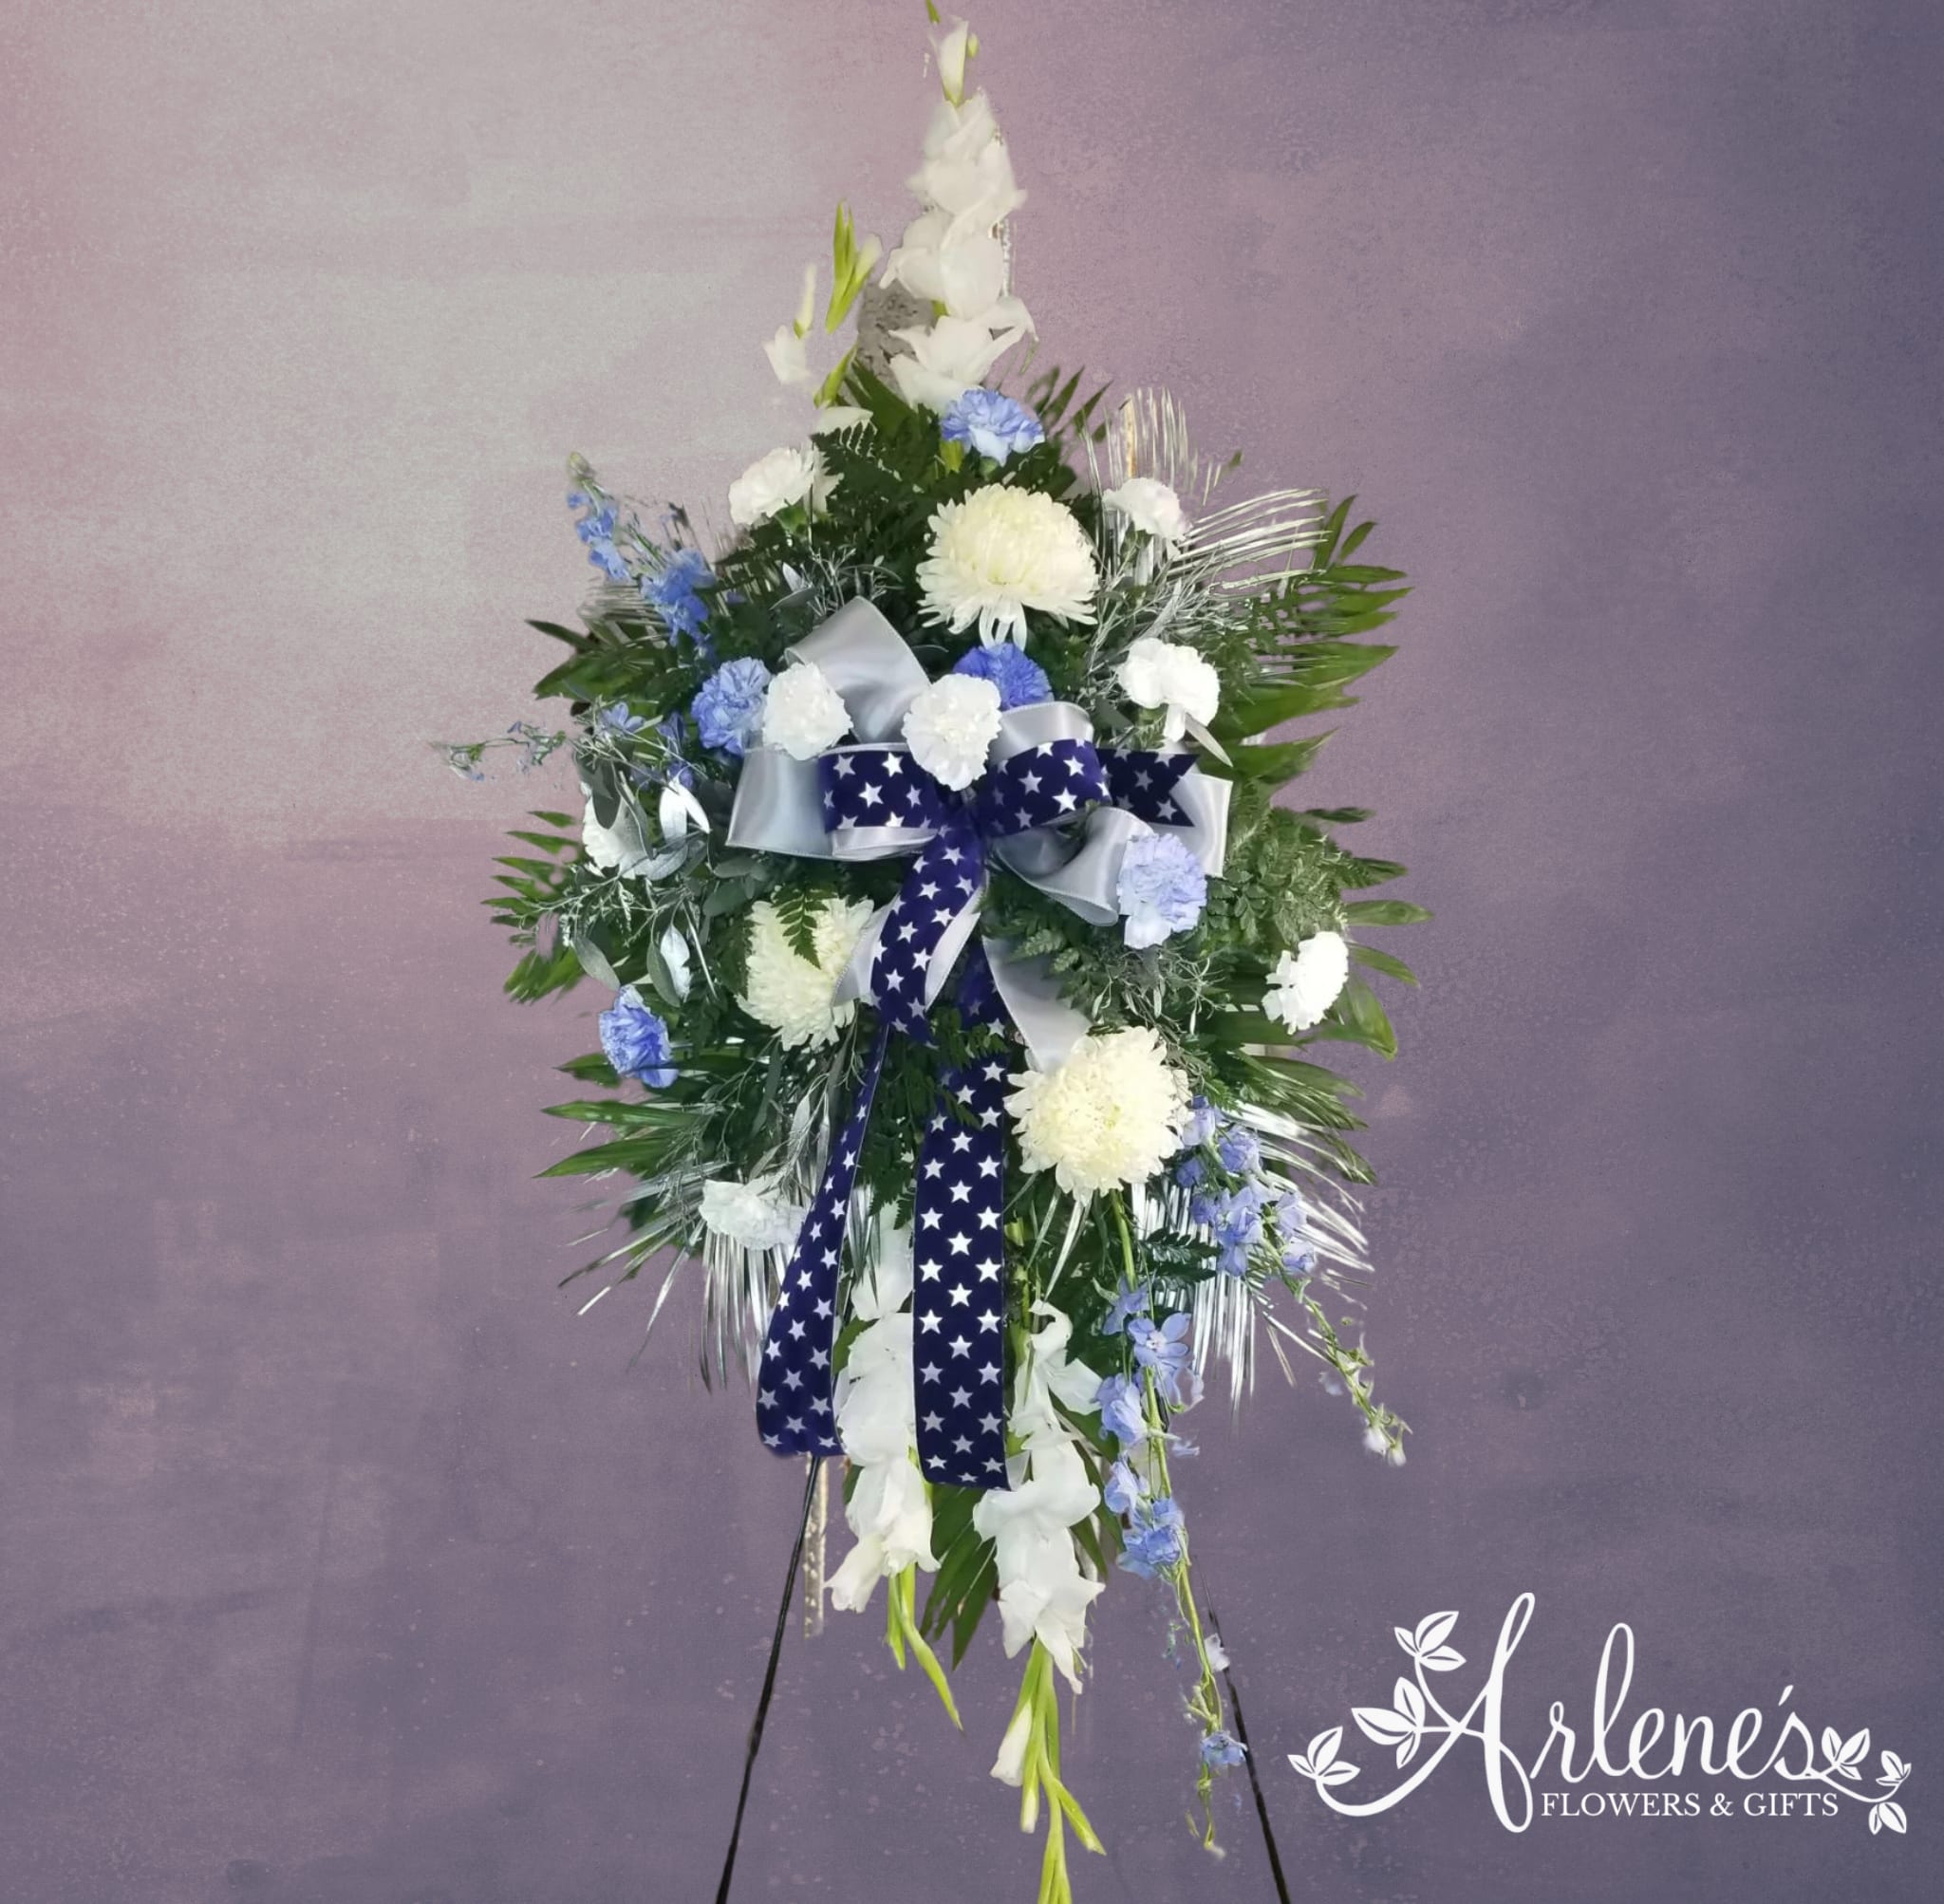 Designer's Choice Blue and White Sympathy Easel - Here are some examples of this popular request. Call us during business hours if you have any special requests, otherwise we will choose what we find to be the best!